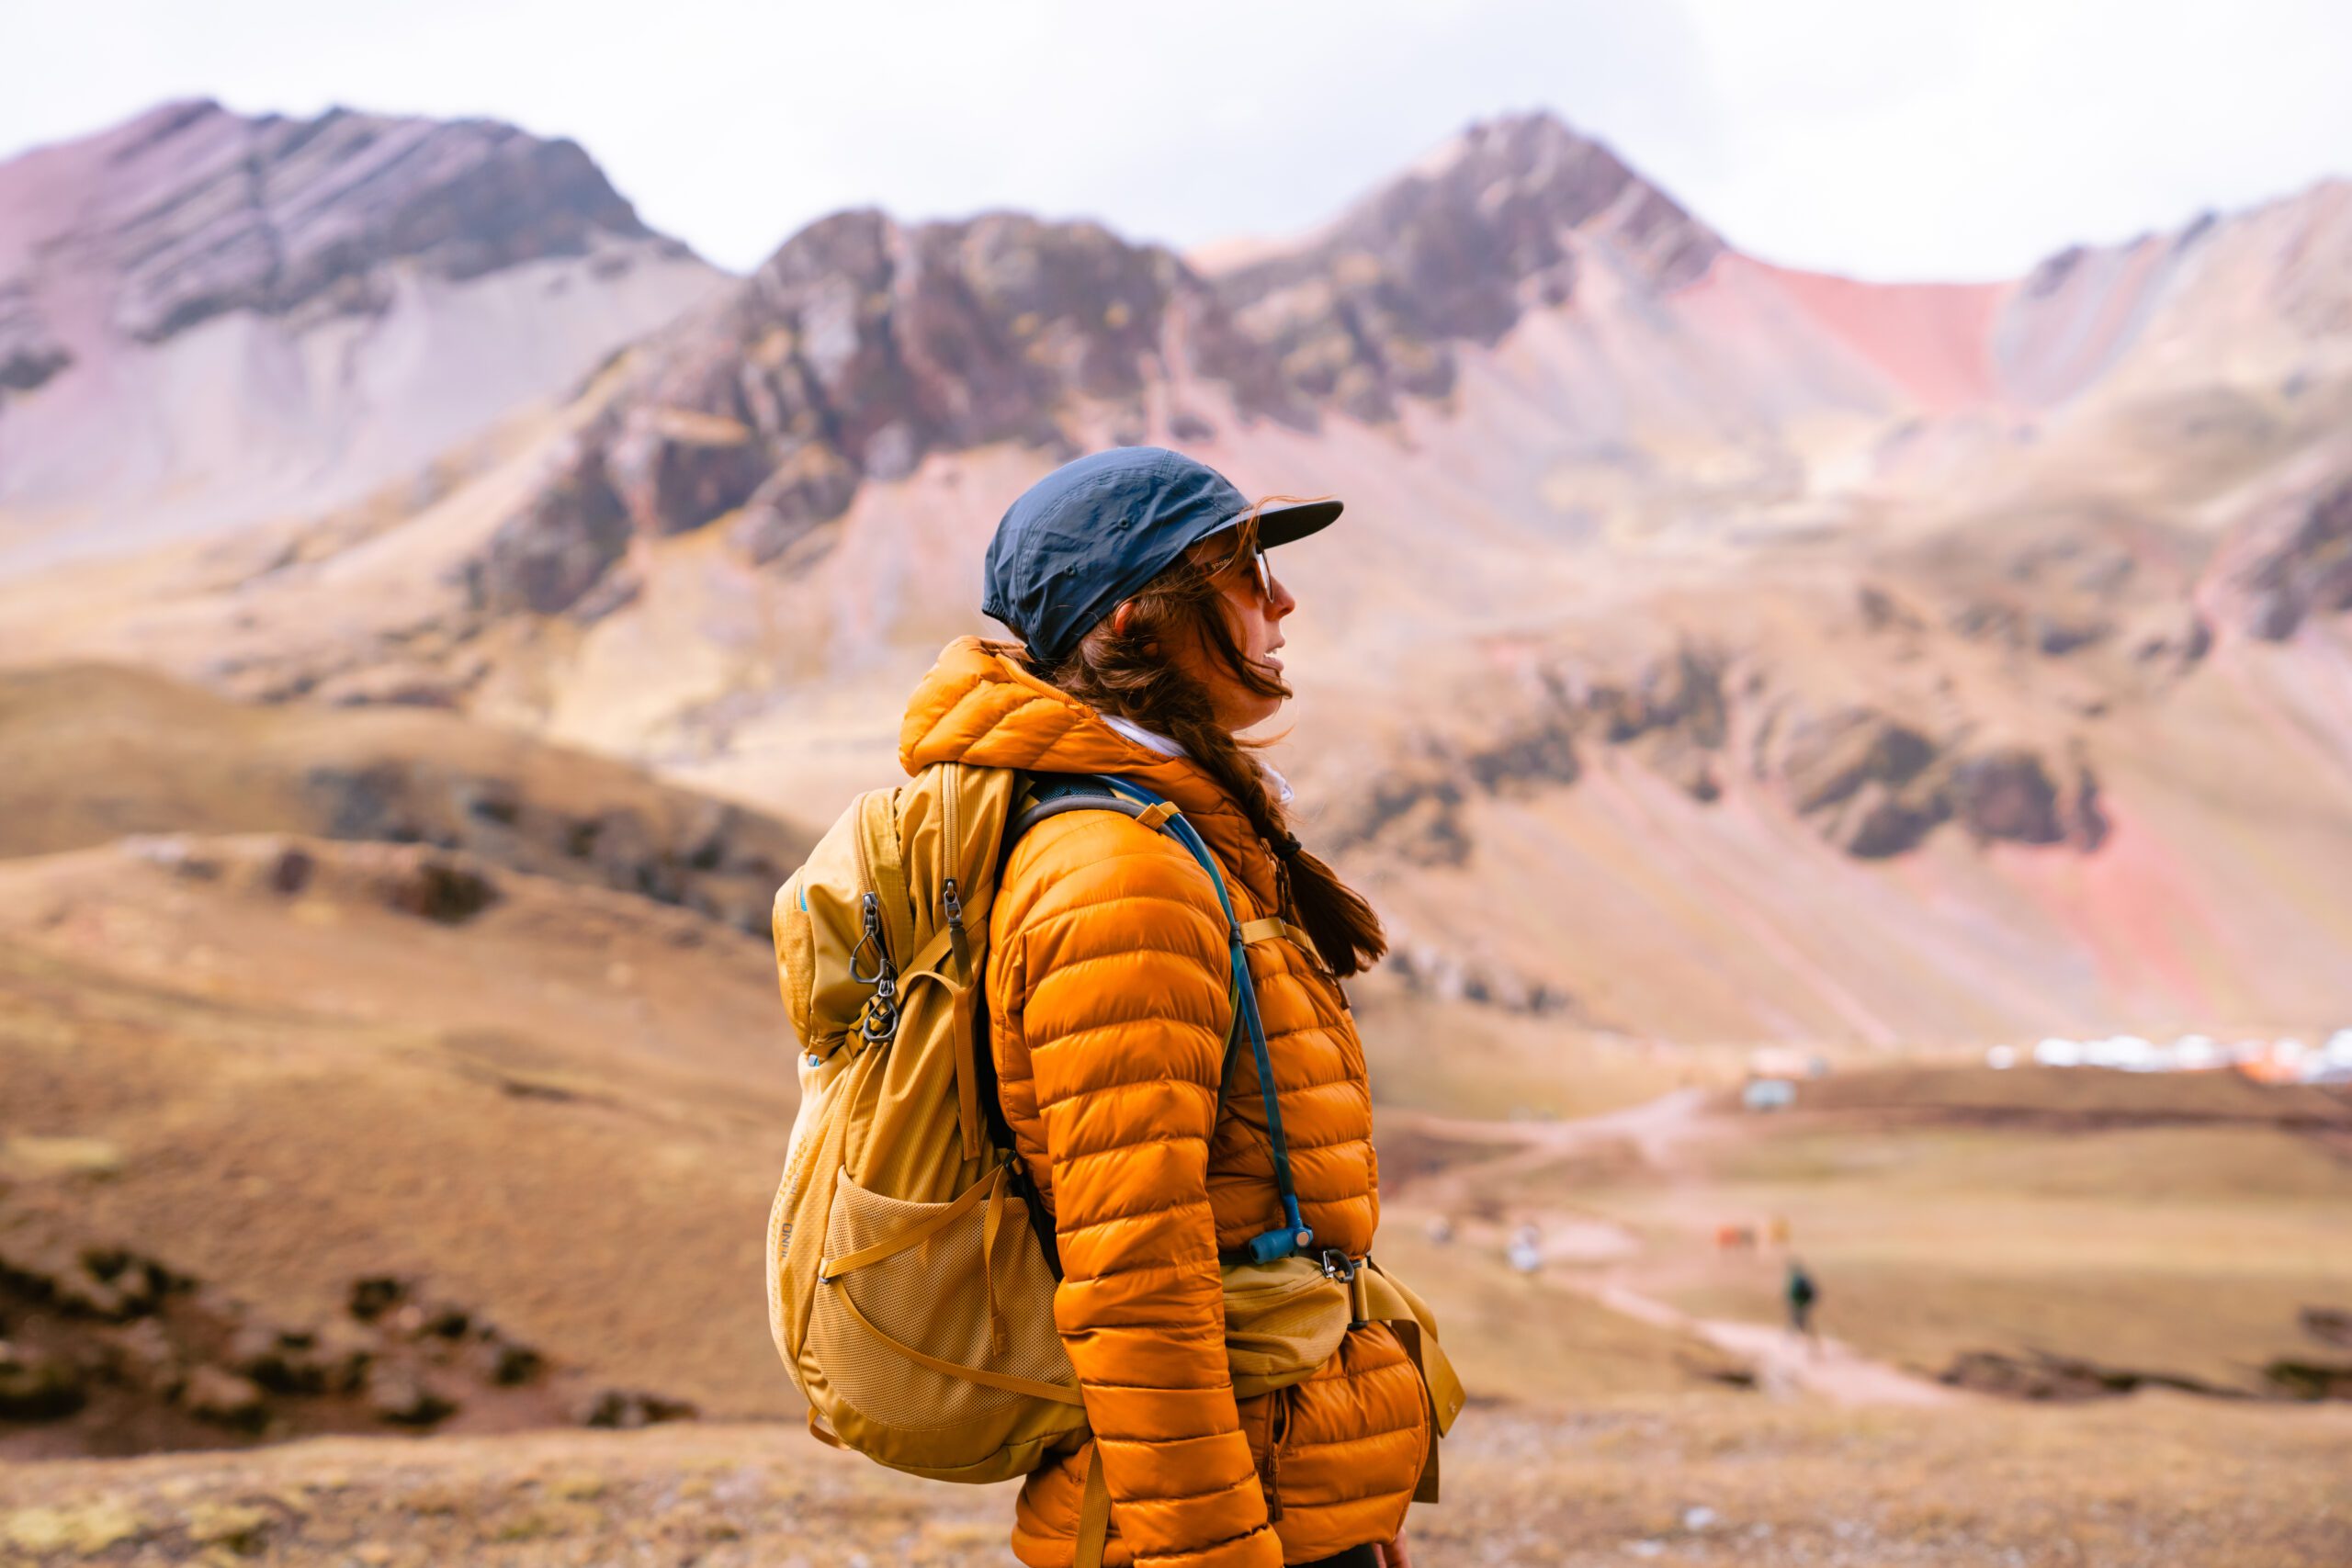 Meredith Ewenson at Rainbow Mountain in Peru on her group hiking trip